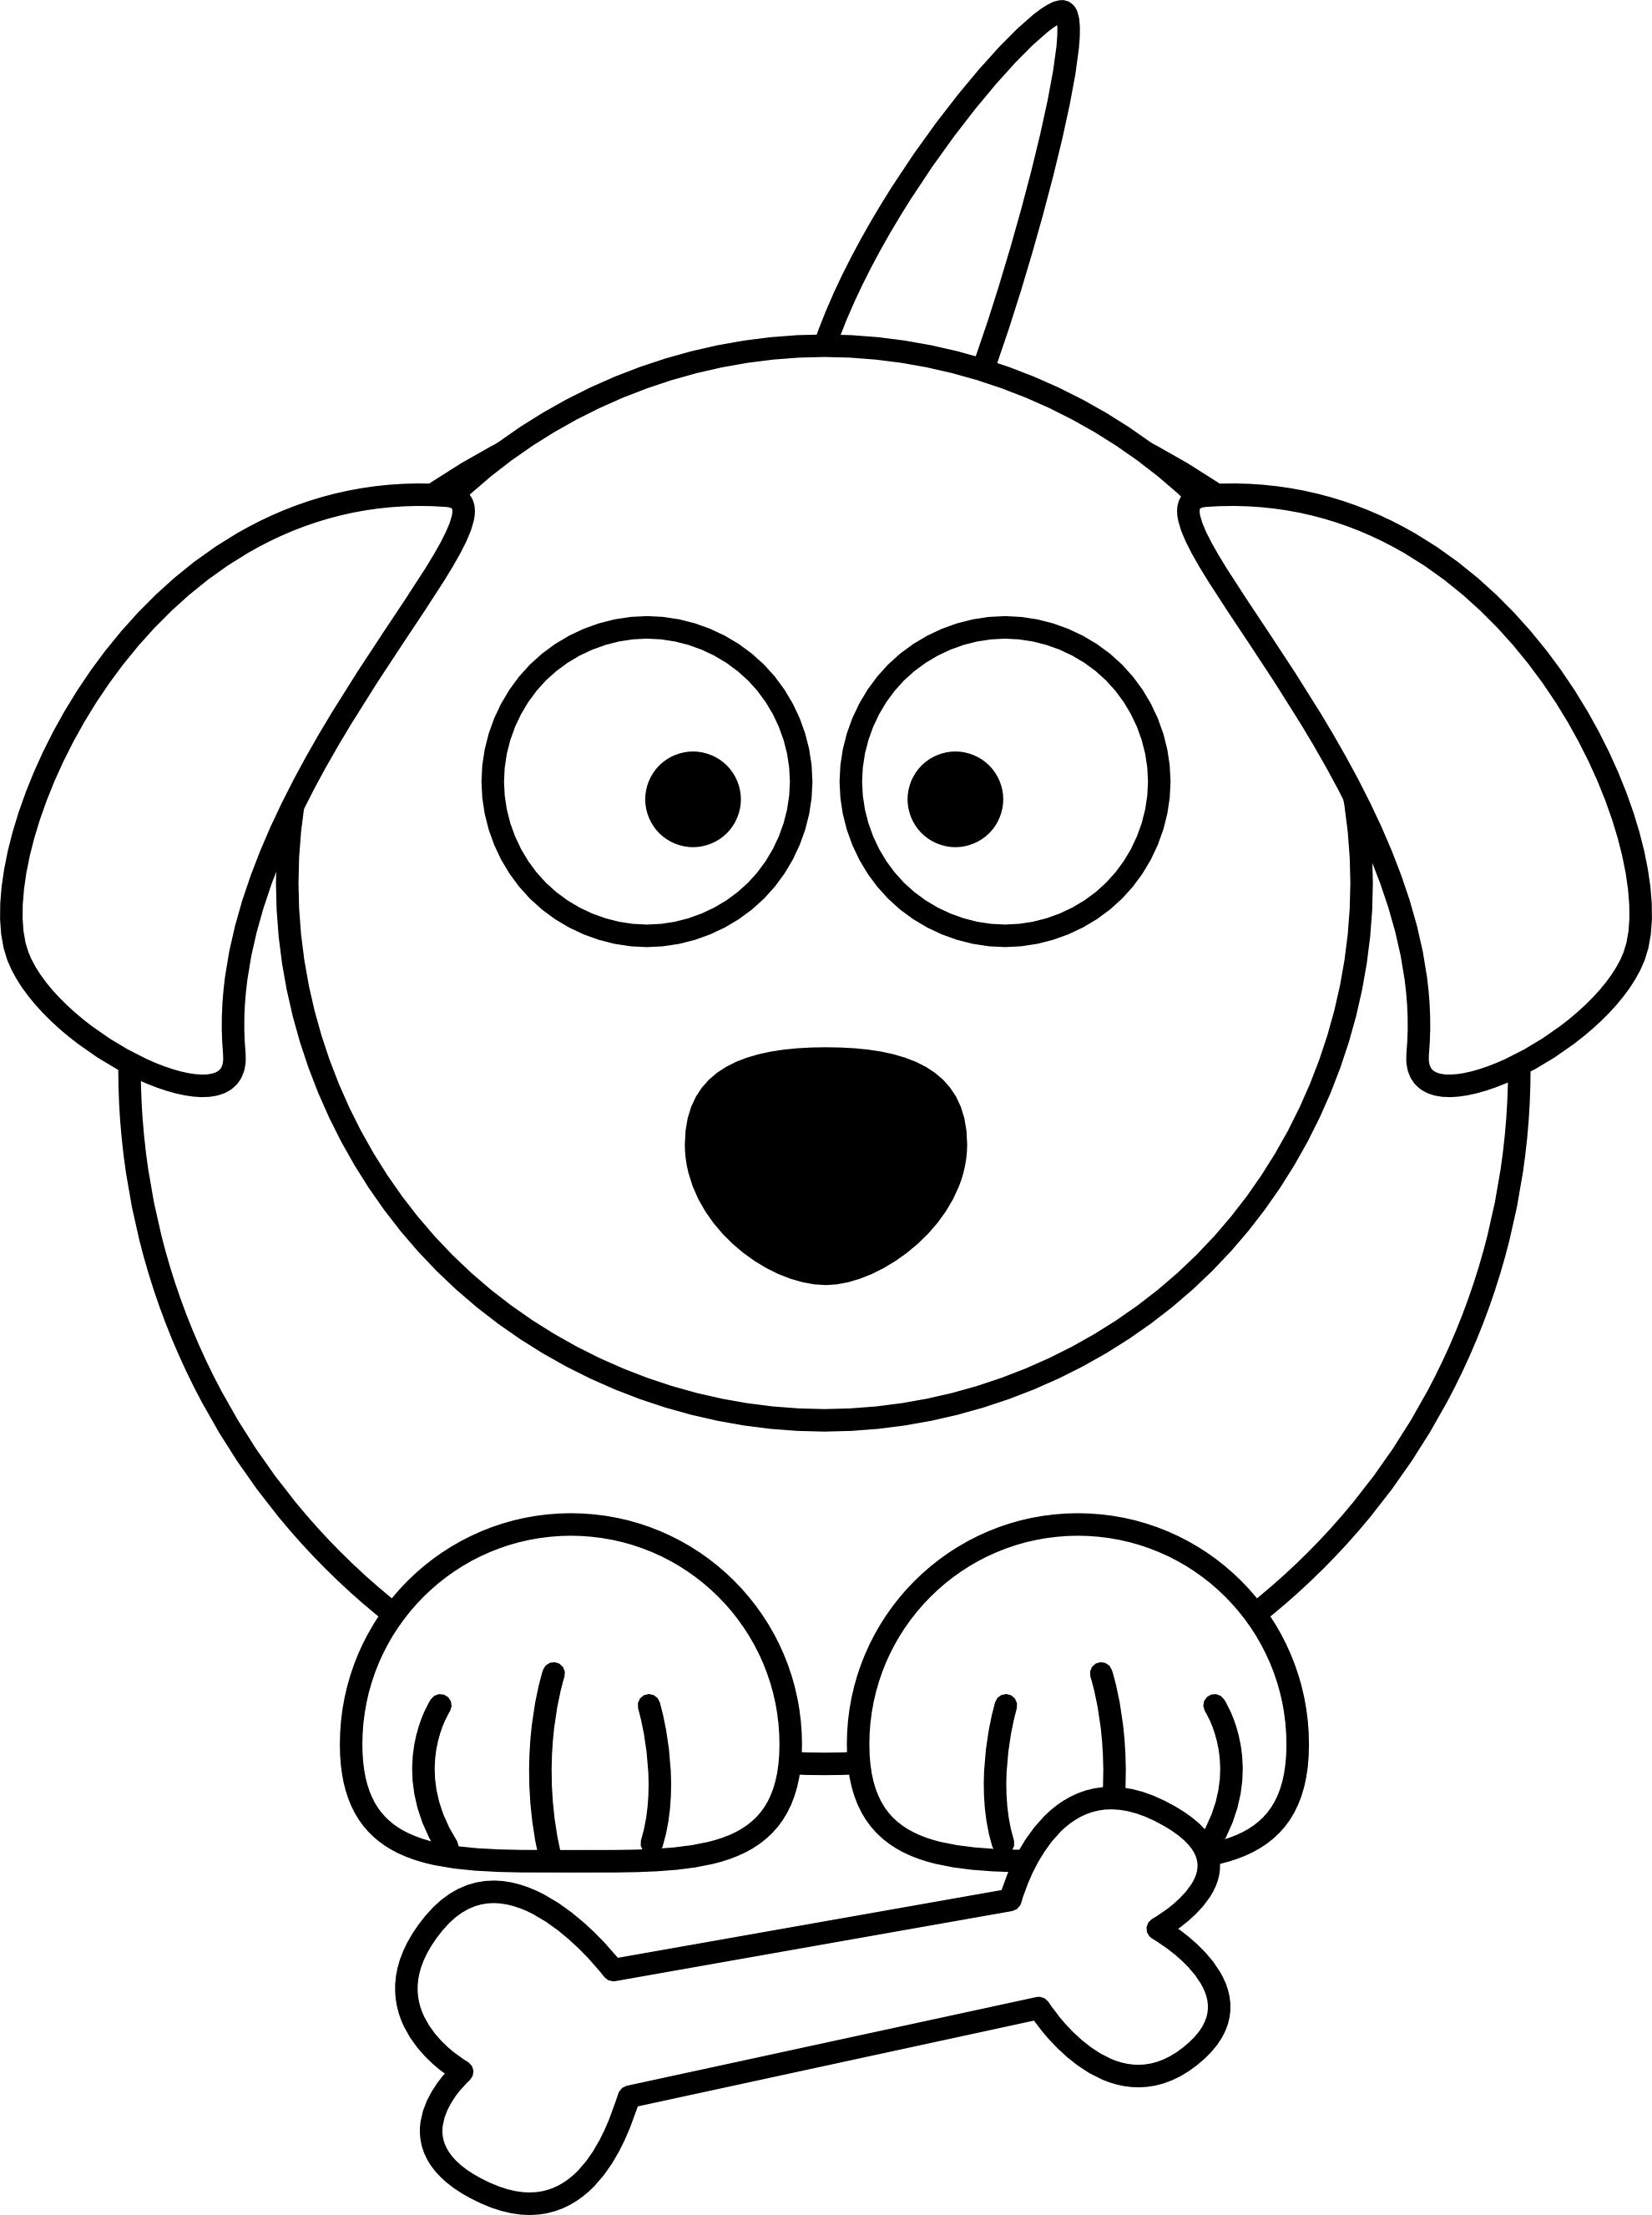 Black And White Dog Images - ClipArt Best